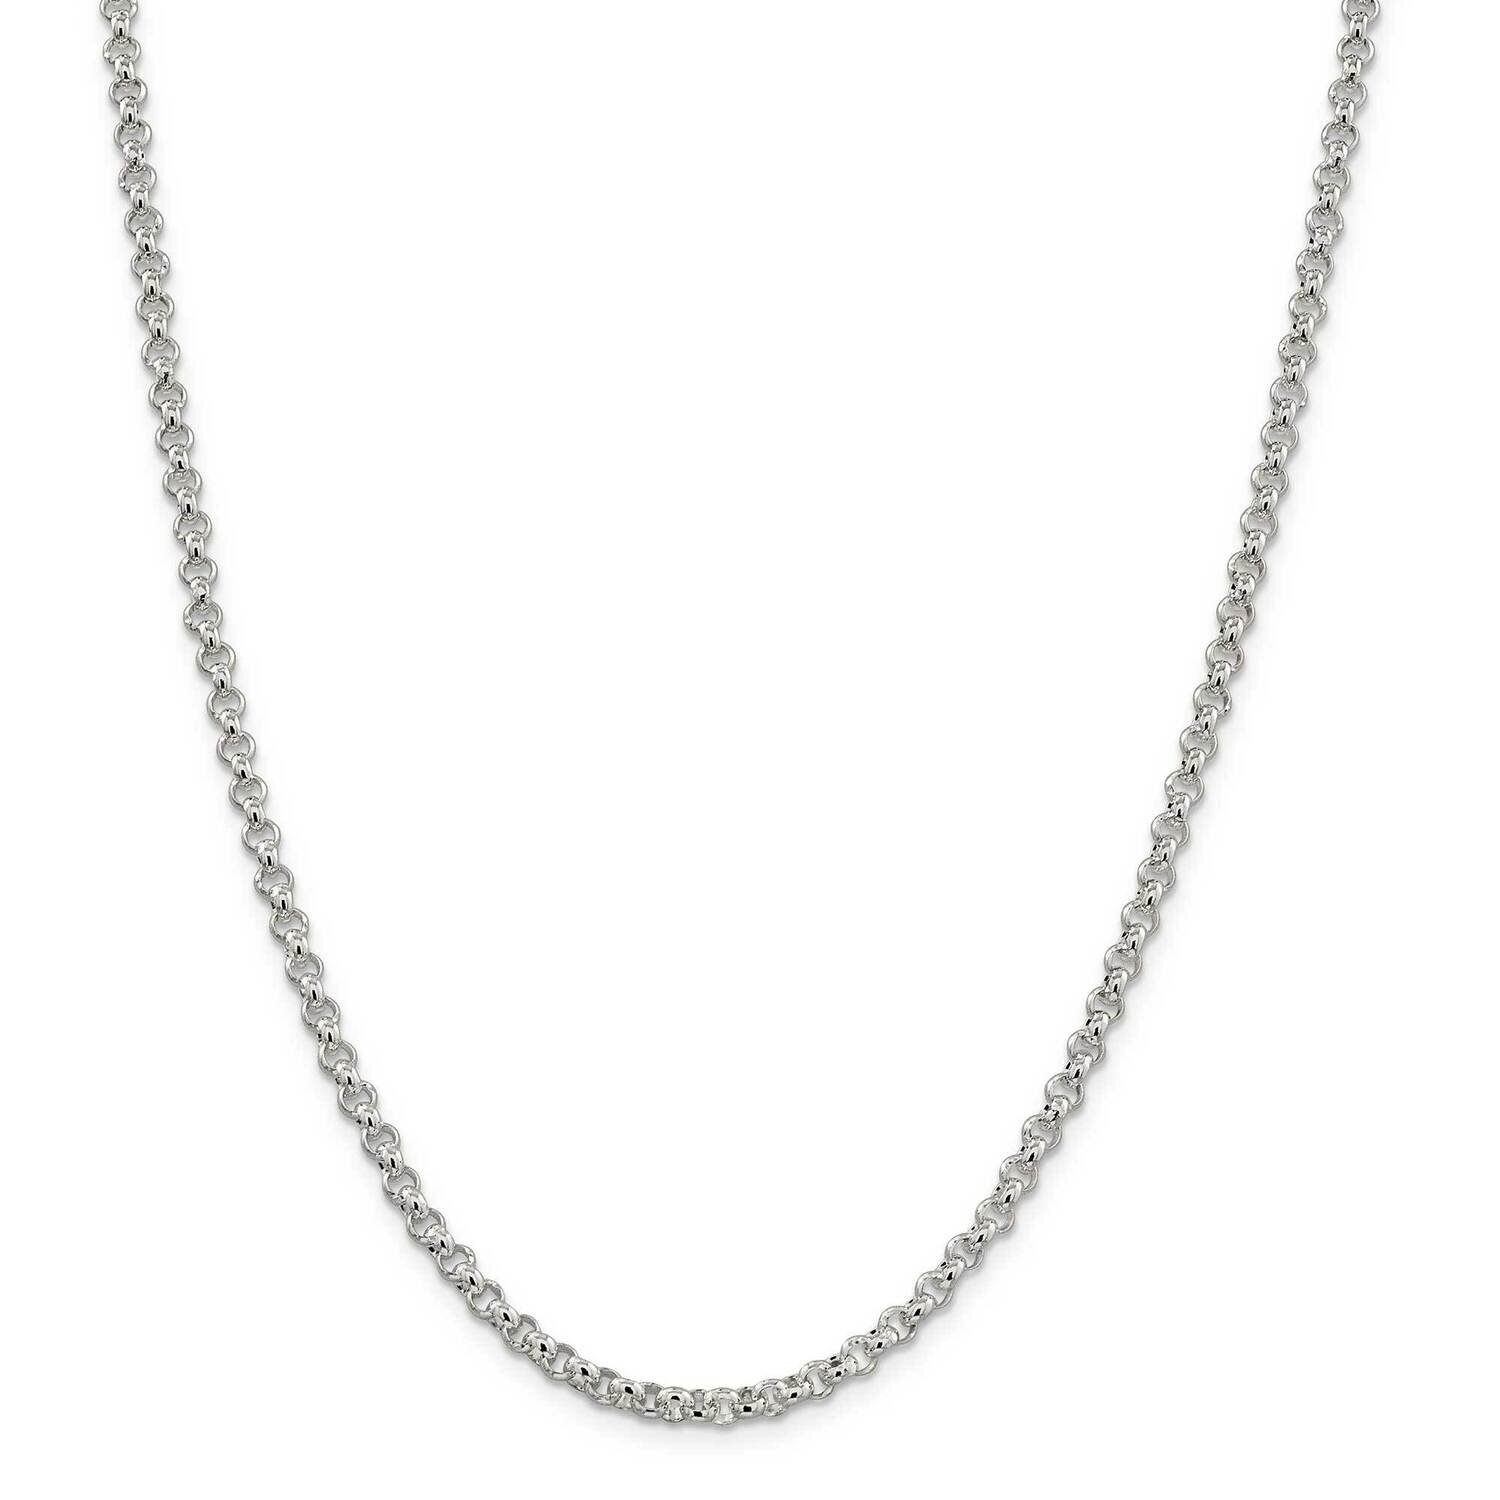 3mm Square Spiga Chain 22 Inch Sterling Silver QFC32-22